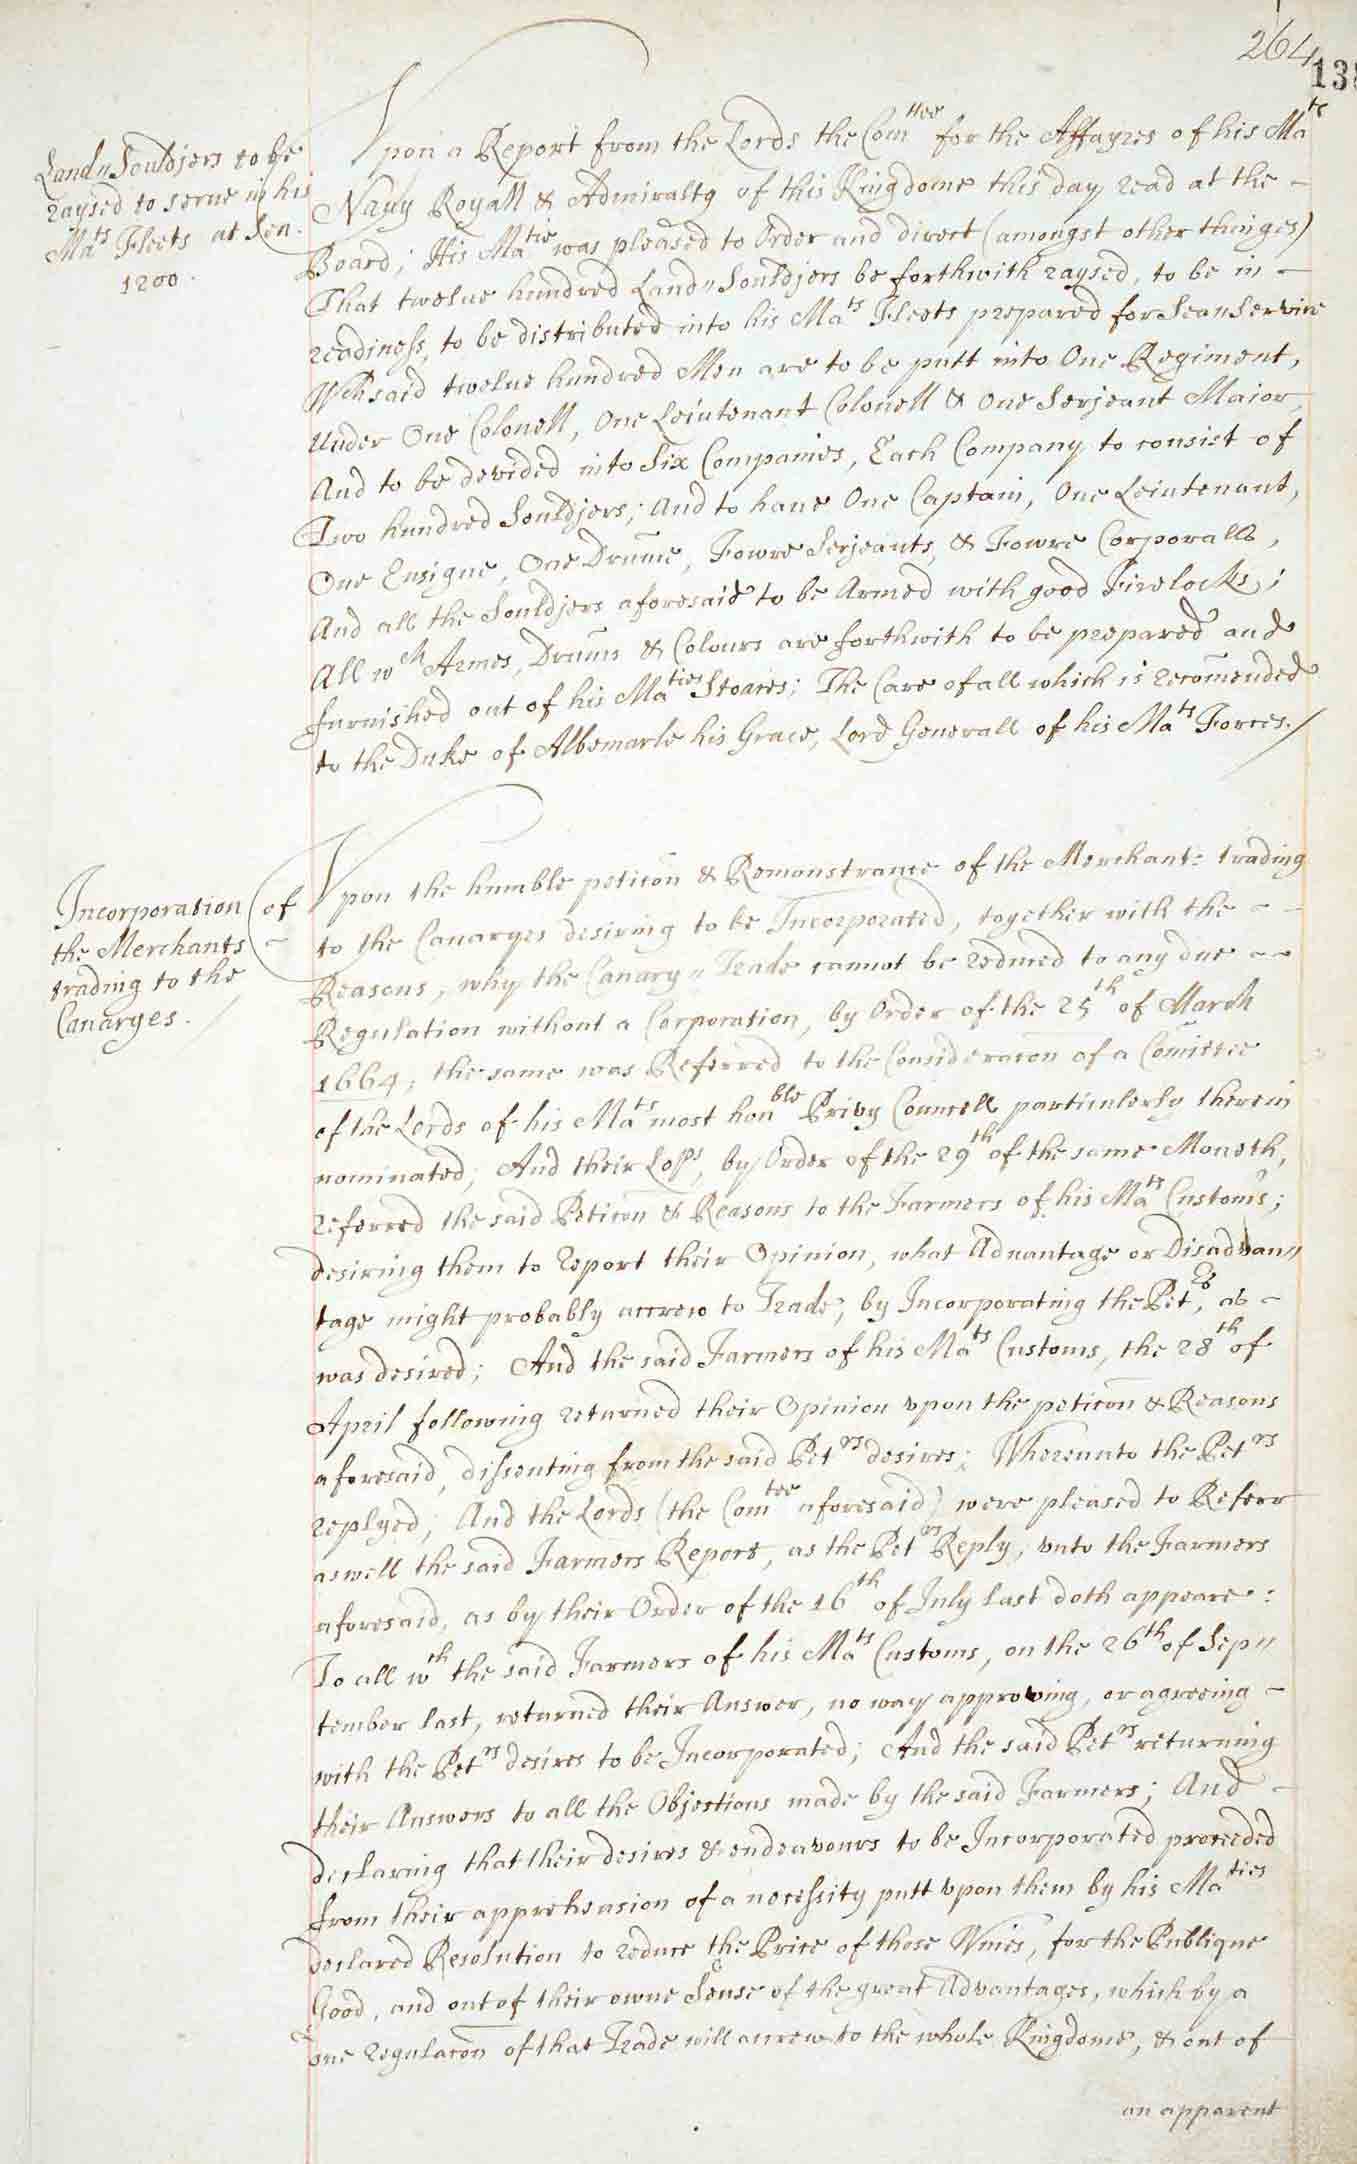 Order in Council for the formation of the Duke of York and Albany's men. Catalogue reference: PC 2/57 f138 